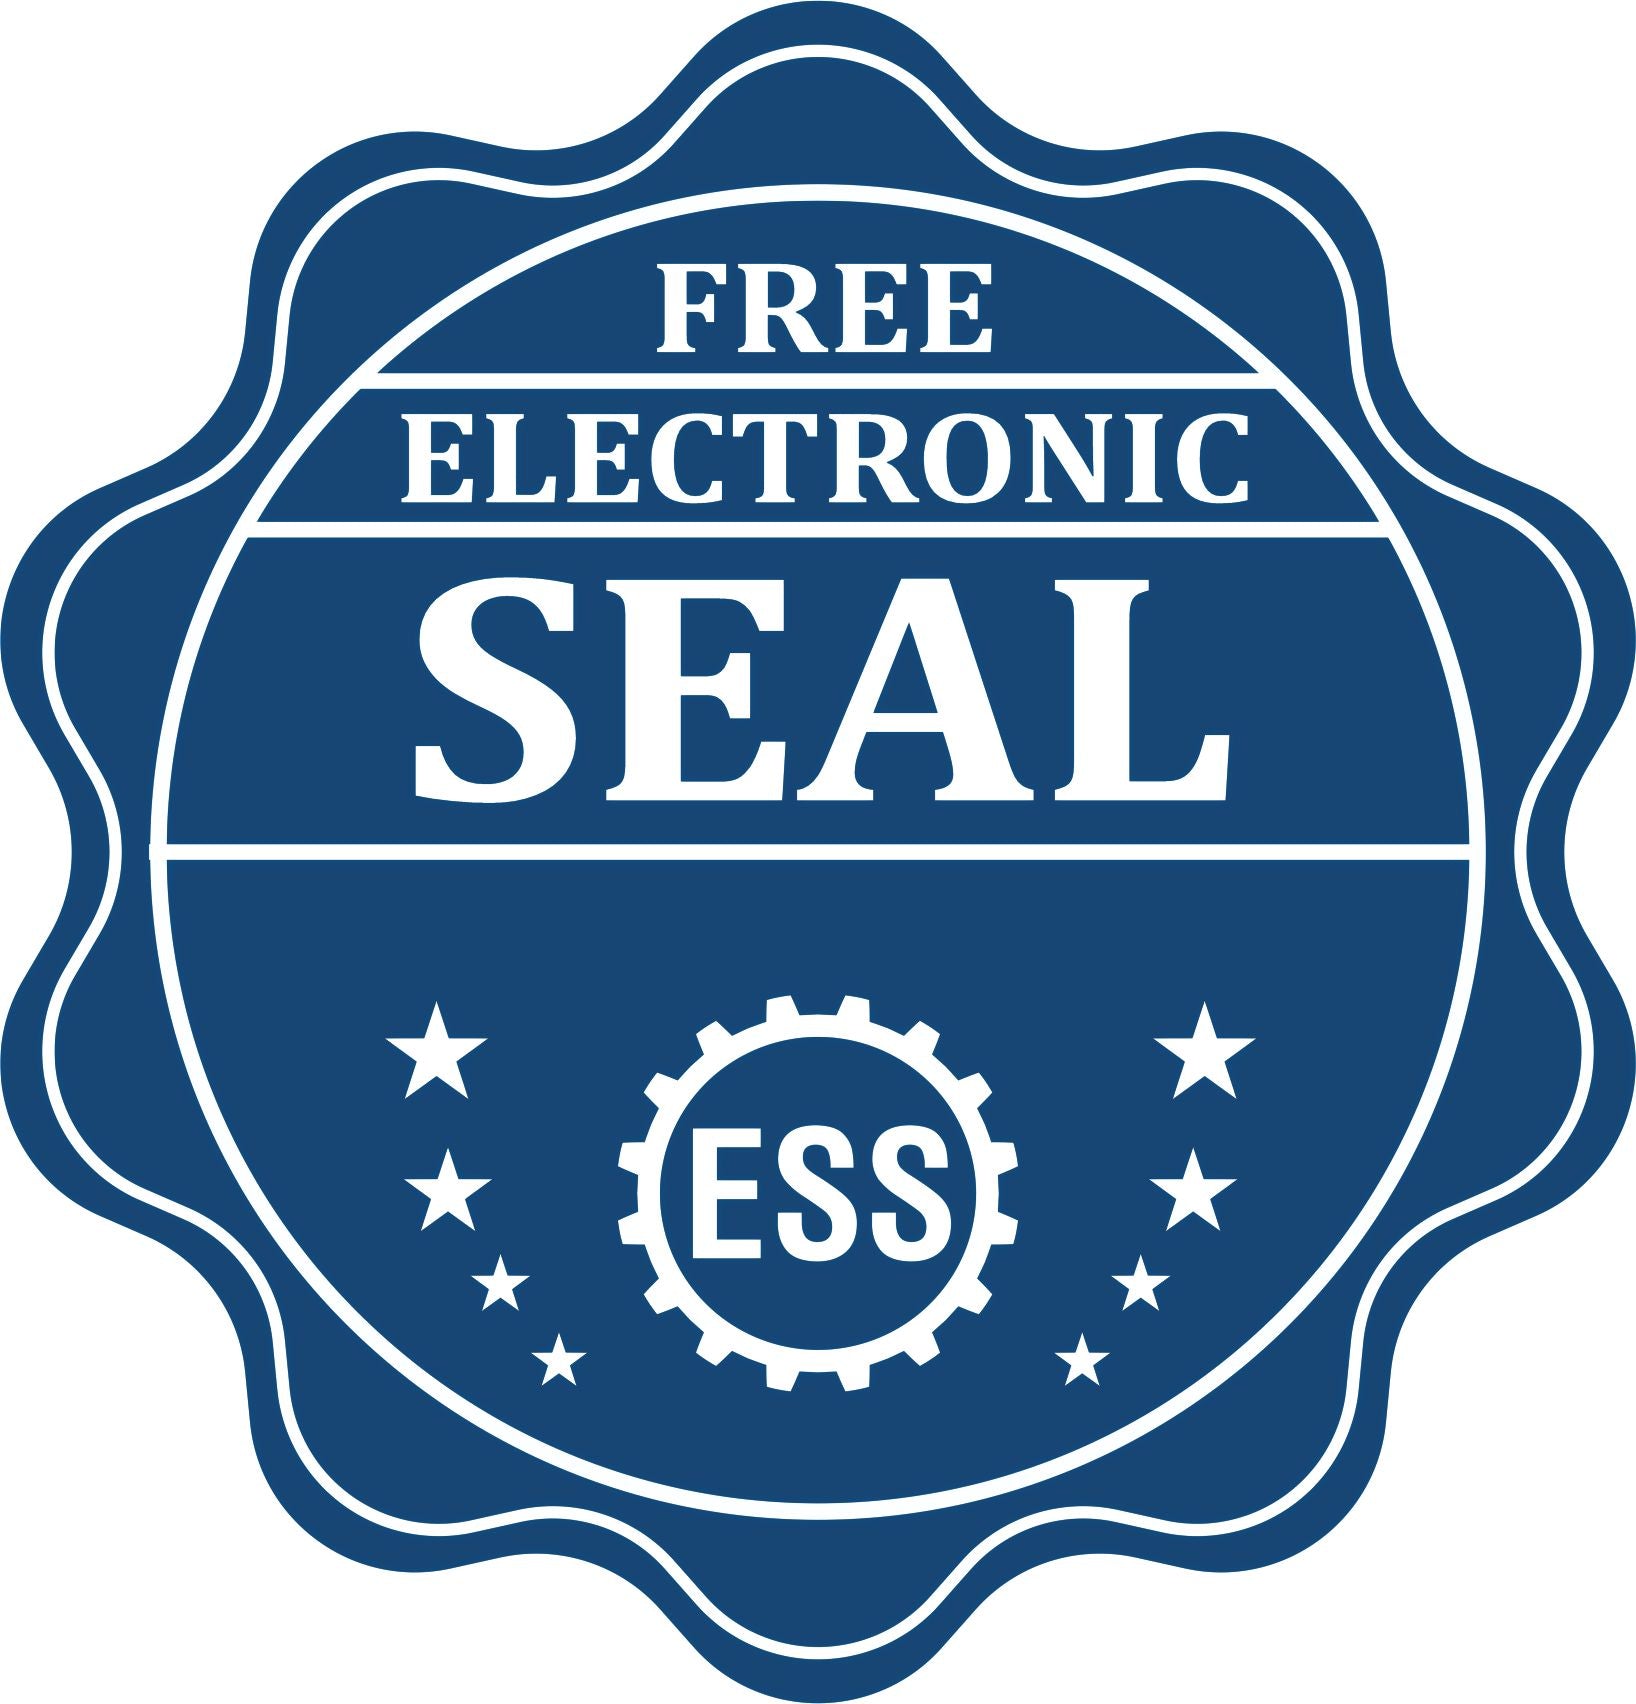 A badge showing a free electronic seal for the Soft Oregon Professional Engineer Seal with stars and the ESS gear on the emblem.